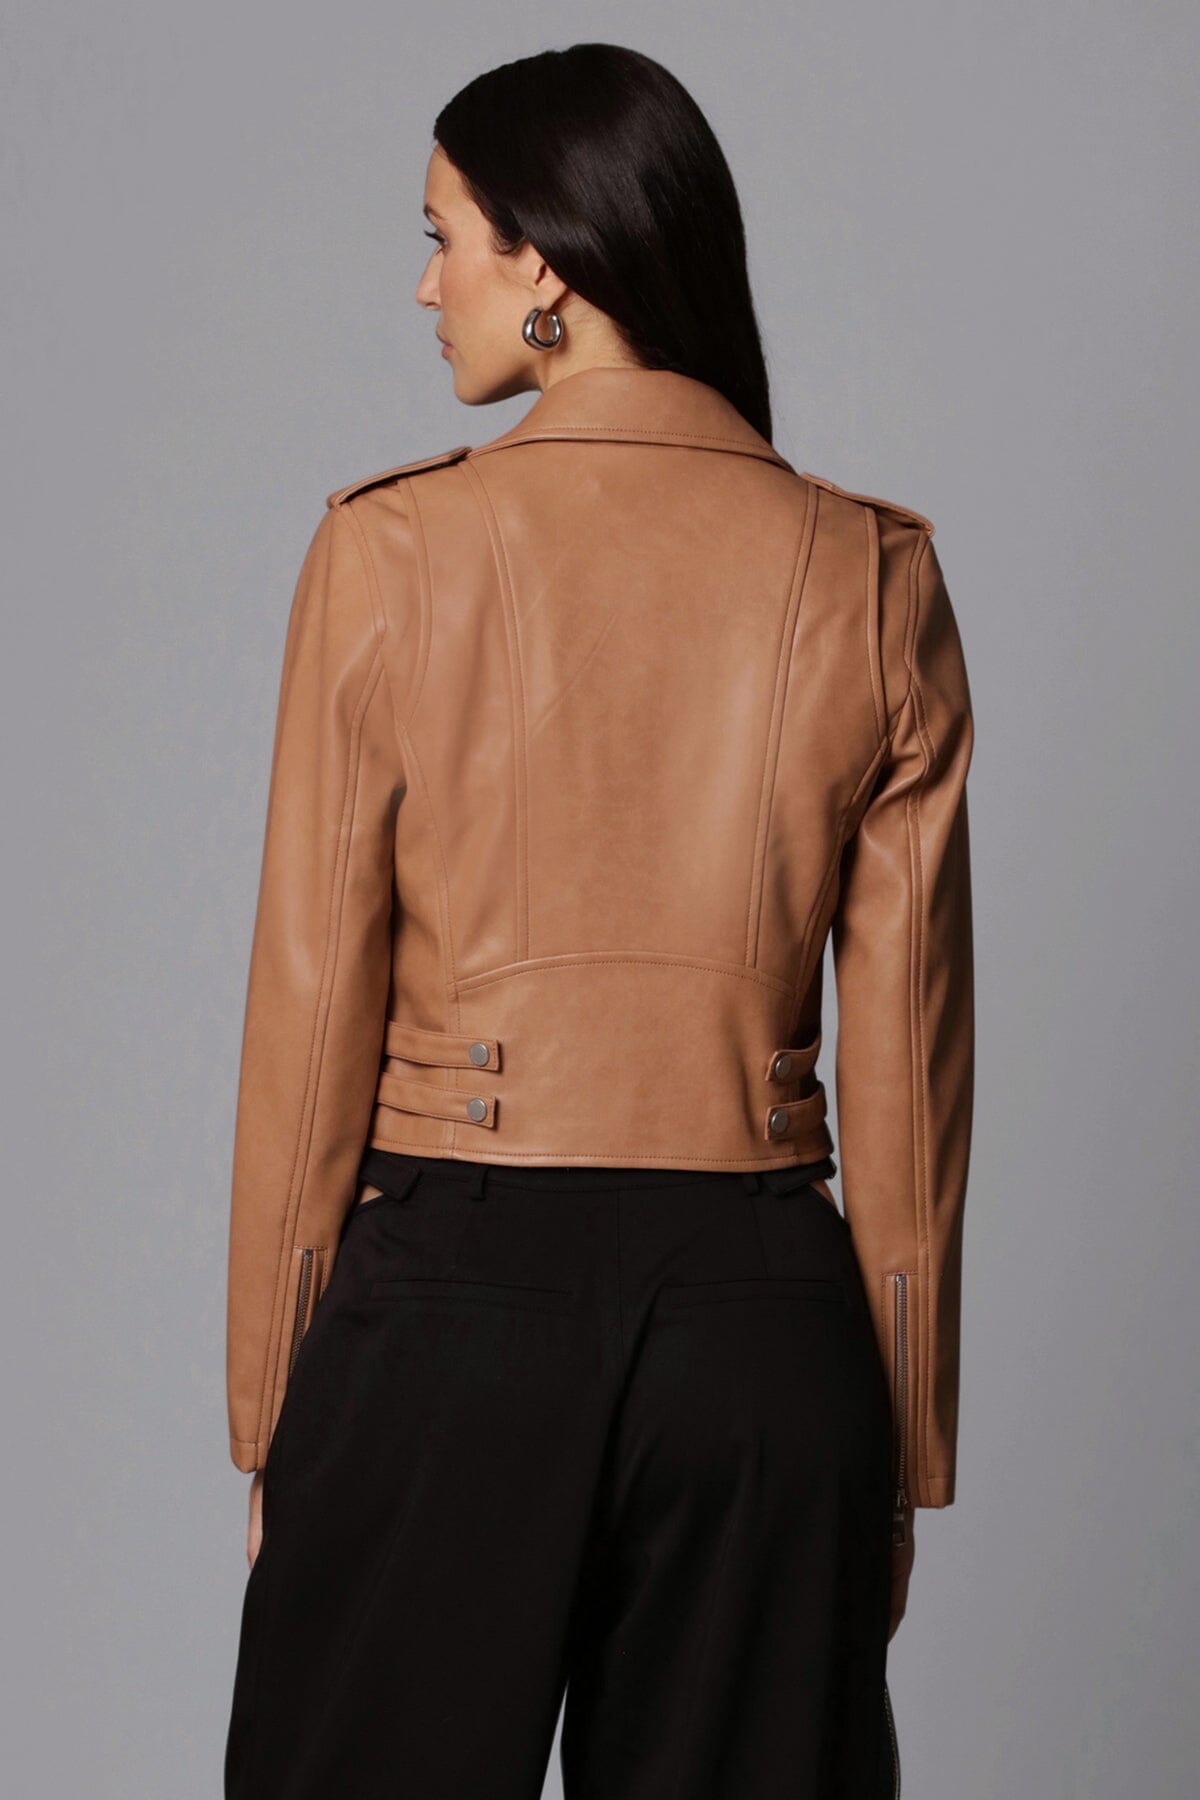 faux ever leather classic biker jacket camel brown - women's figure flattering designer fashion day to night jackets 